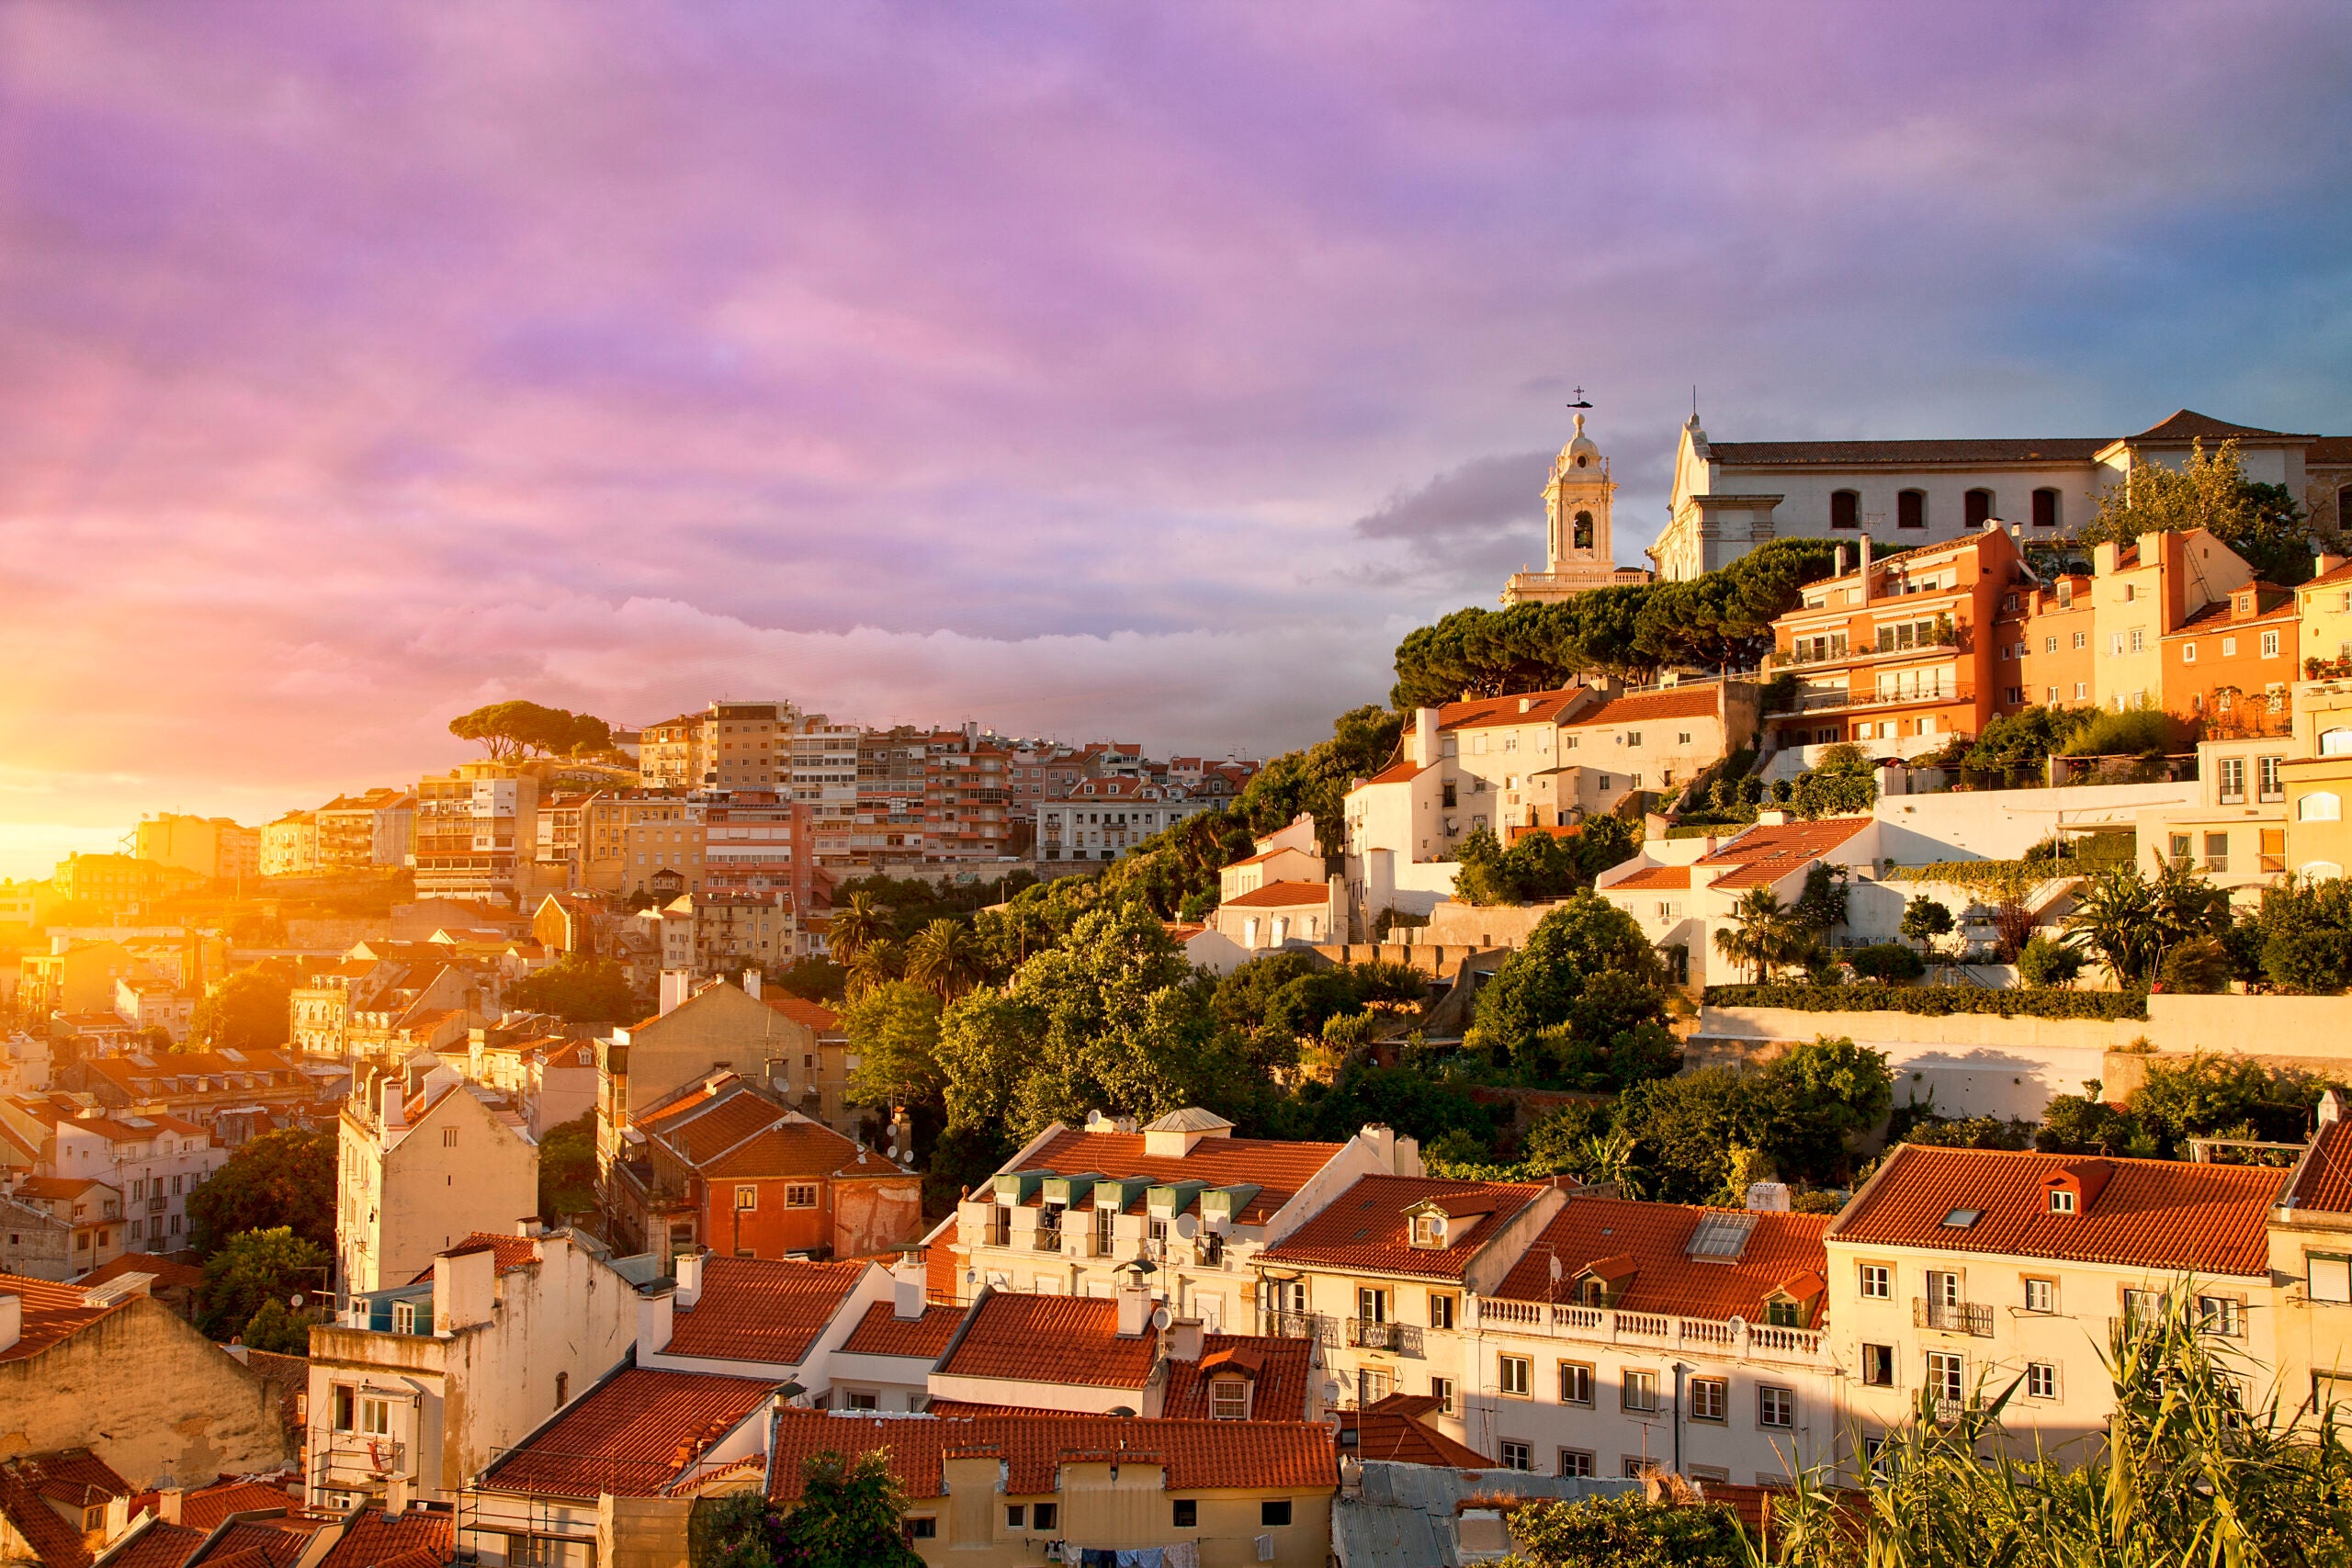 Lisbon, Old Town at Sunset